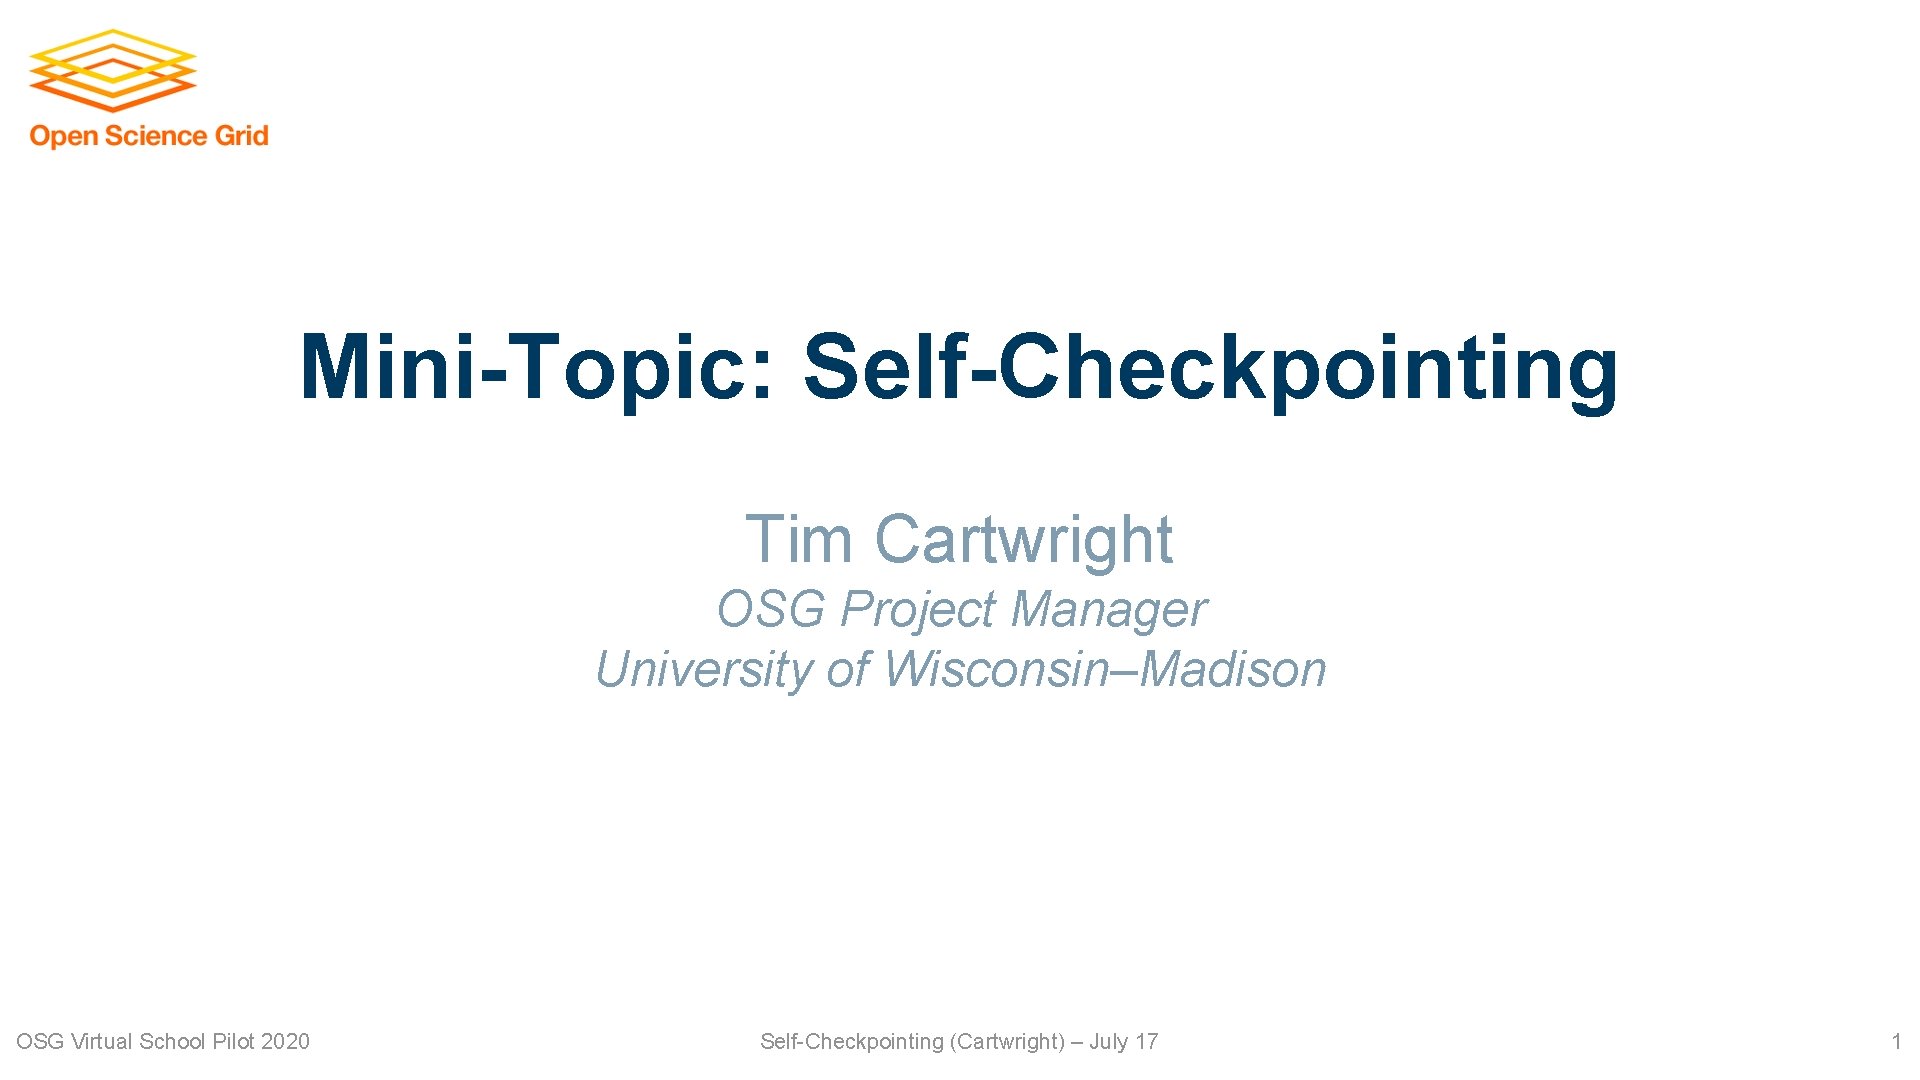 Mini-Topic: Self-Checkpointing Tim Cartwright OSG Project Manager University of Wisconsin–Madison OSG Virtual School Pilot